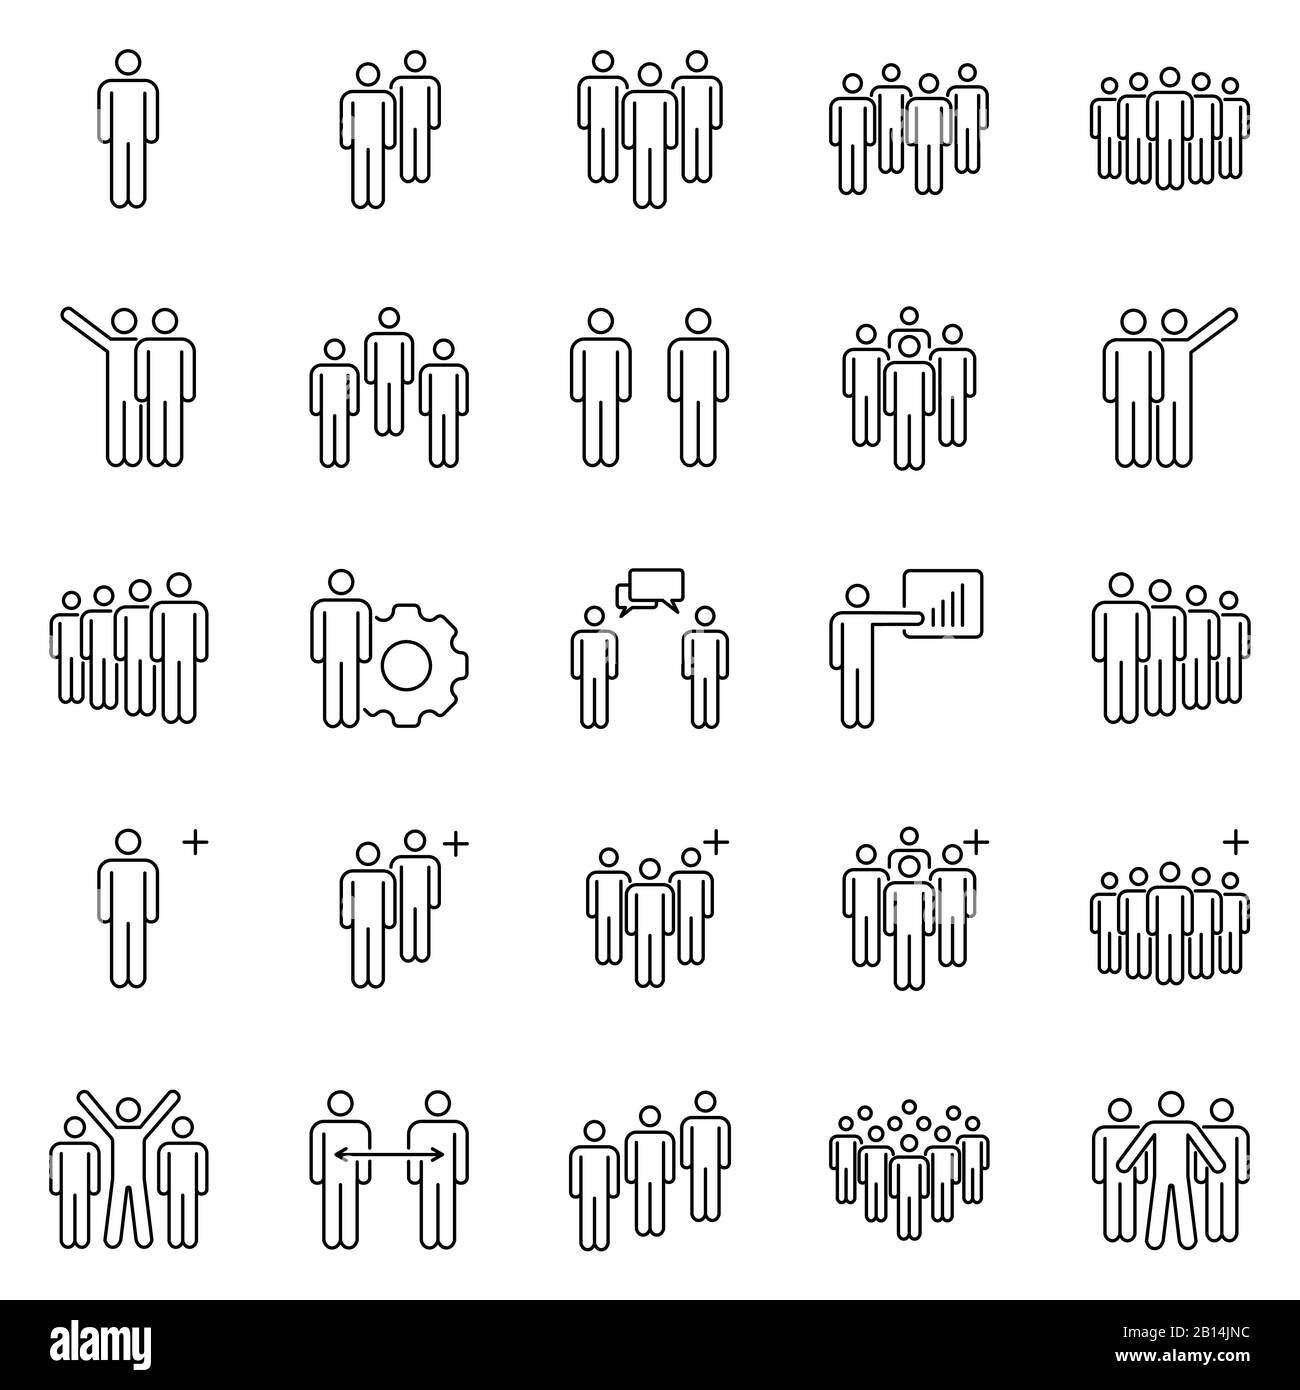 People Team Icons Business Partners Teams Work Group Pictogram And Office Workers Groups